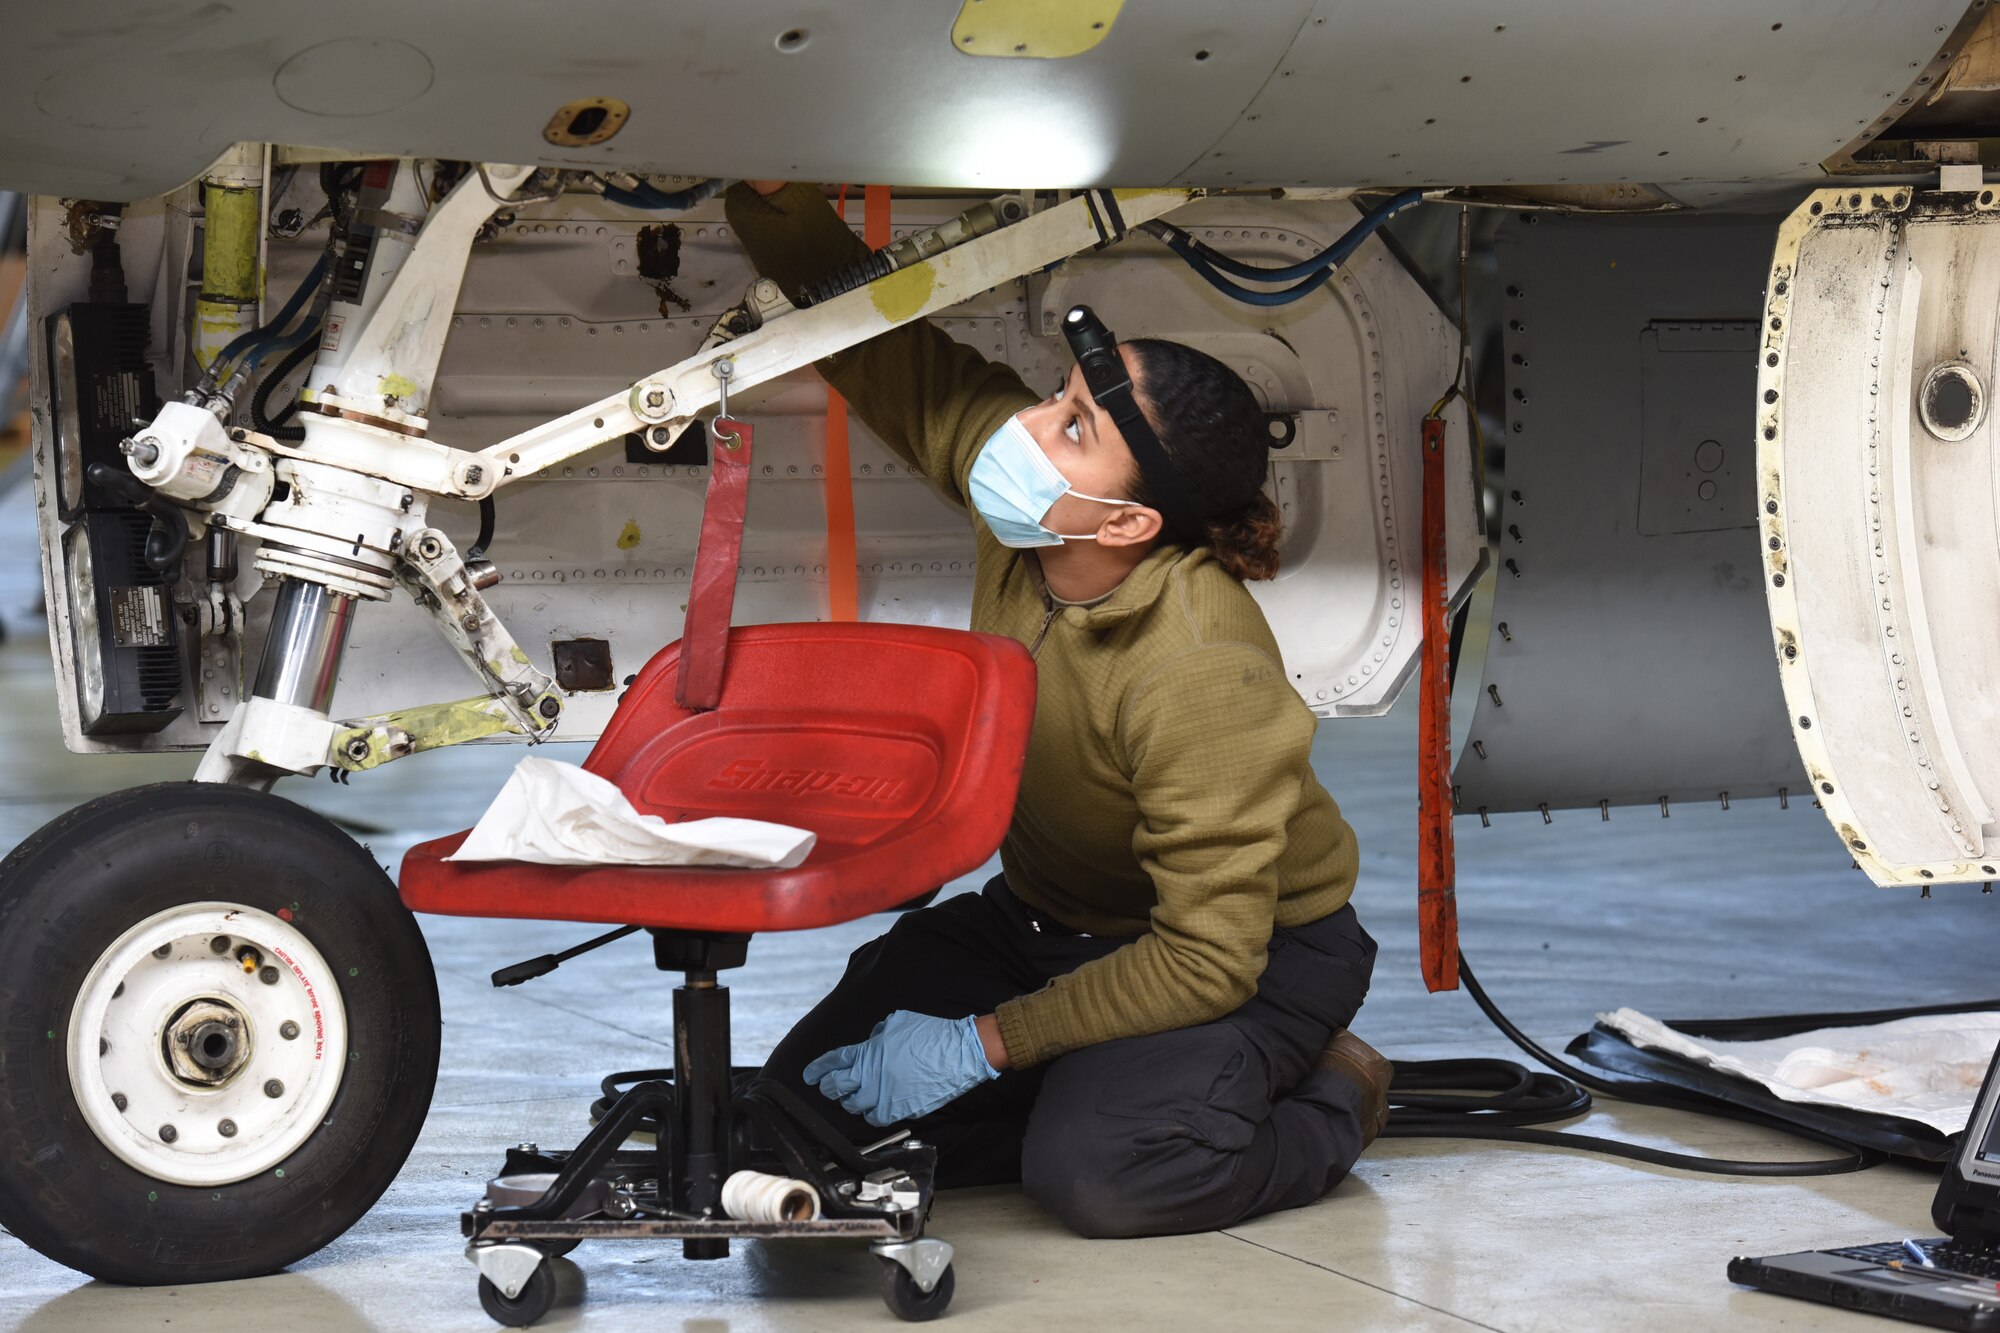 U.S. Air Force Staff Sgt. Kayla Bradford, 52nd Maintenance Squadron Aircraft Inspection Craftsman, conducts an aircraft phase inspection on a U.S. Air Force F-16 Fighting Falcon. The phase inspection is due every 400 flight hours. (U.S. Air Force photo by Tech. Sgt. Tony Plyler)